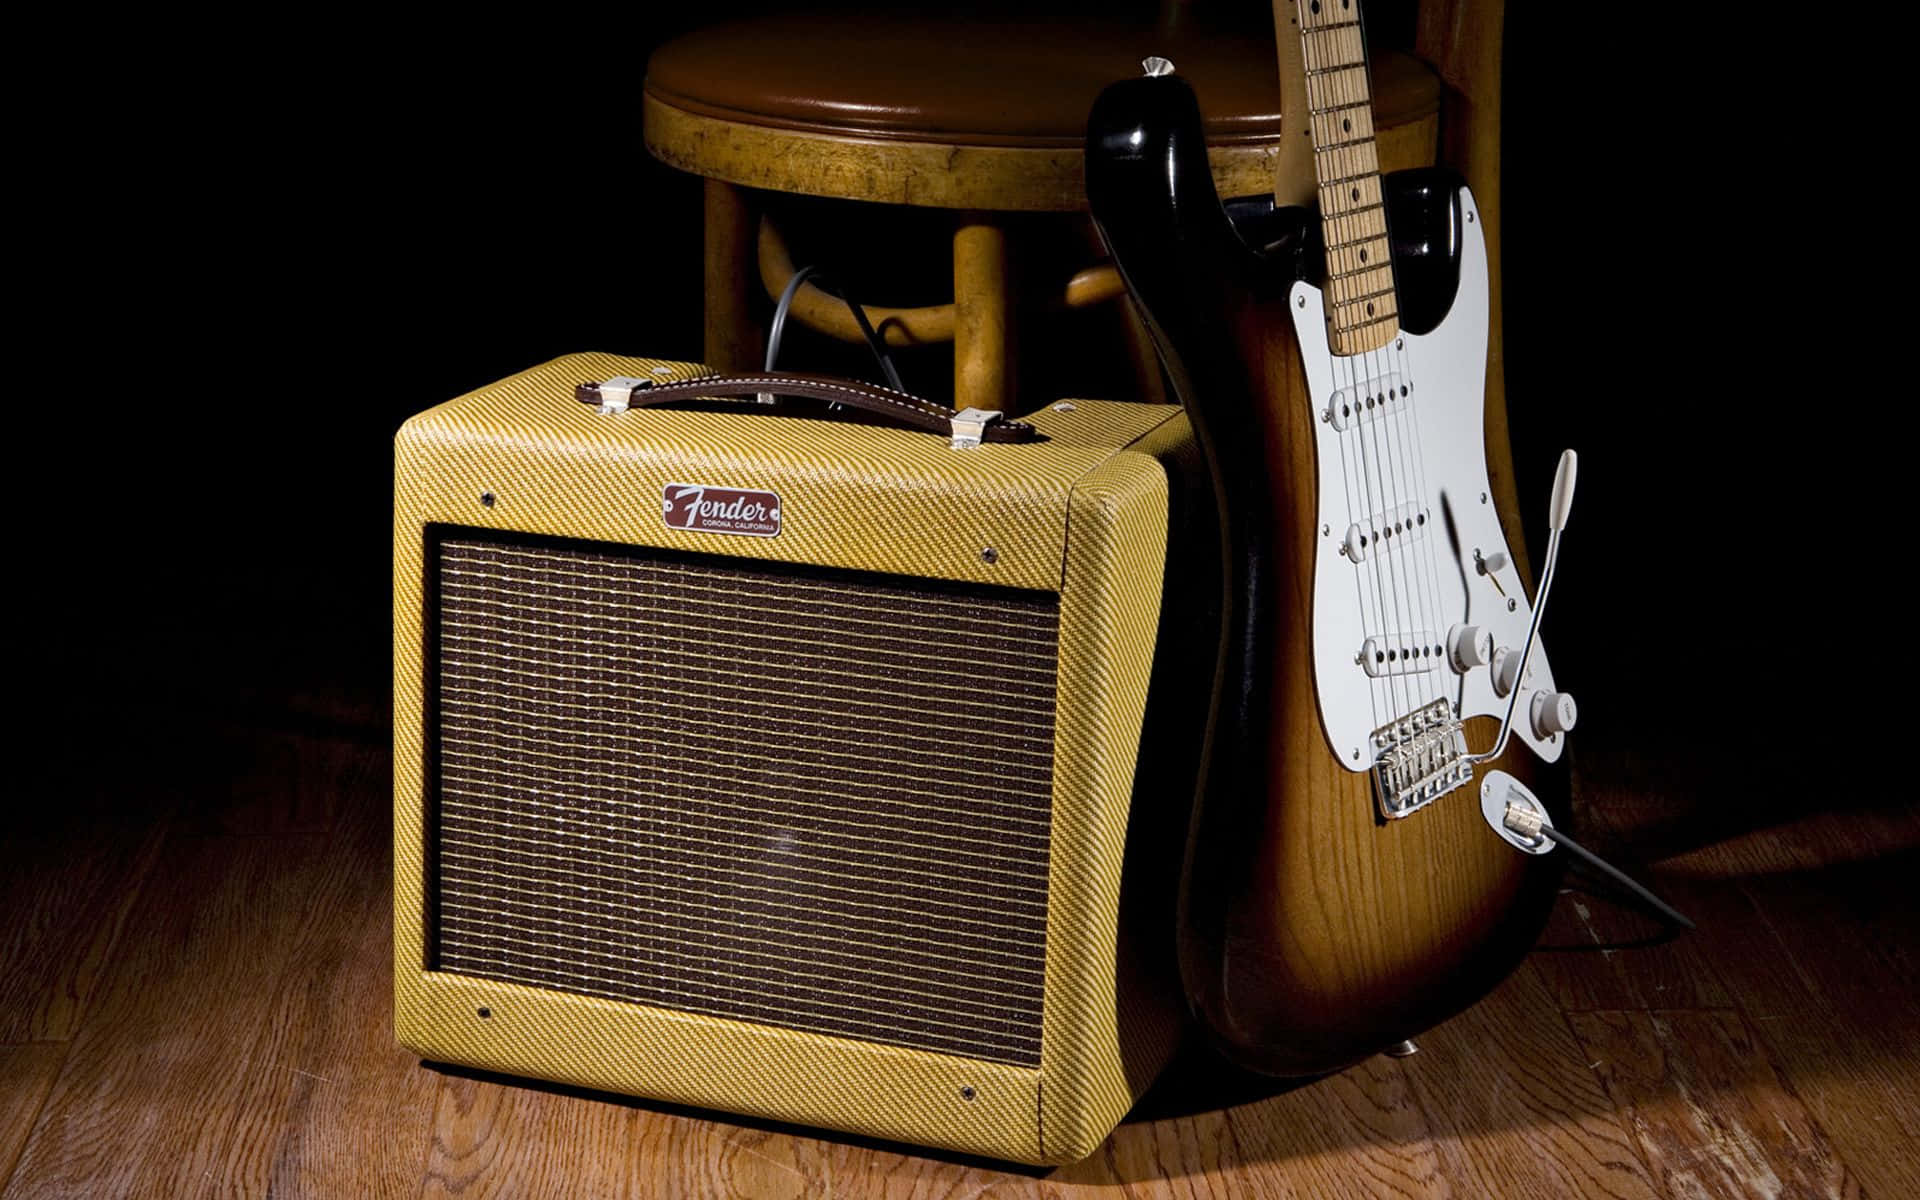 Turn up the volume and rock out with this iconic guitar amp Wallpaper